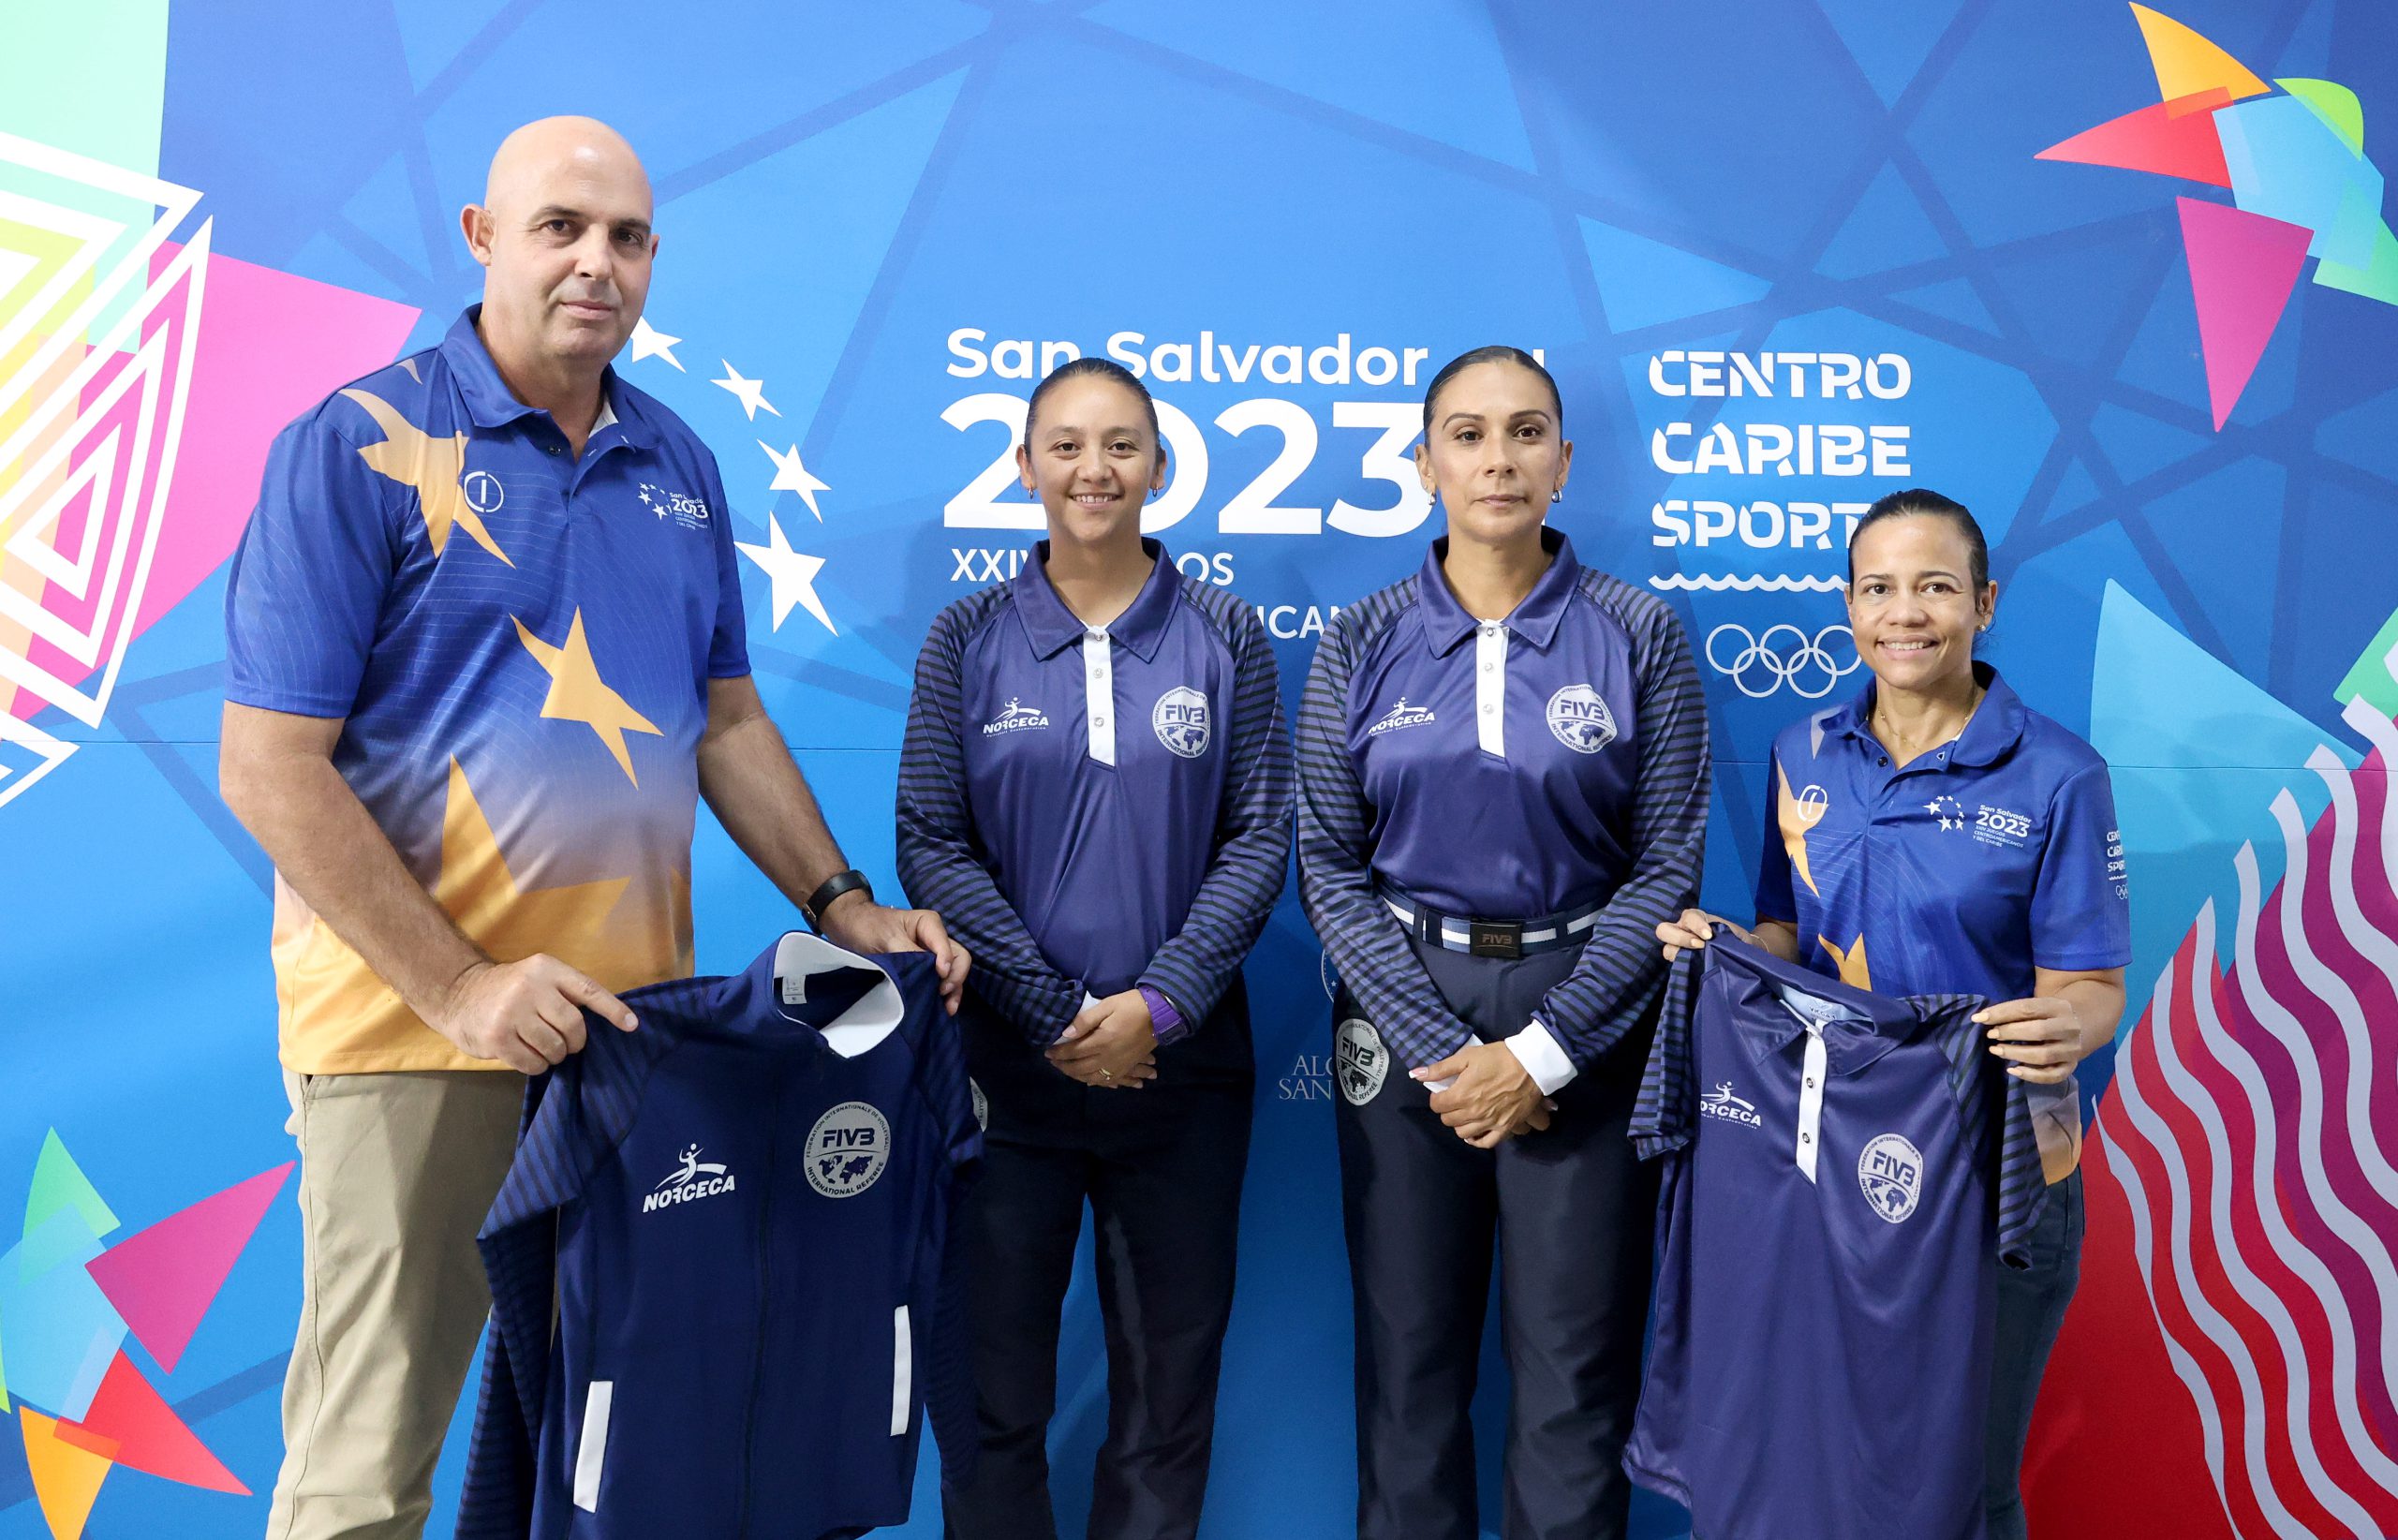 New Uniforms for NORCECA International Referees